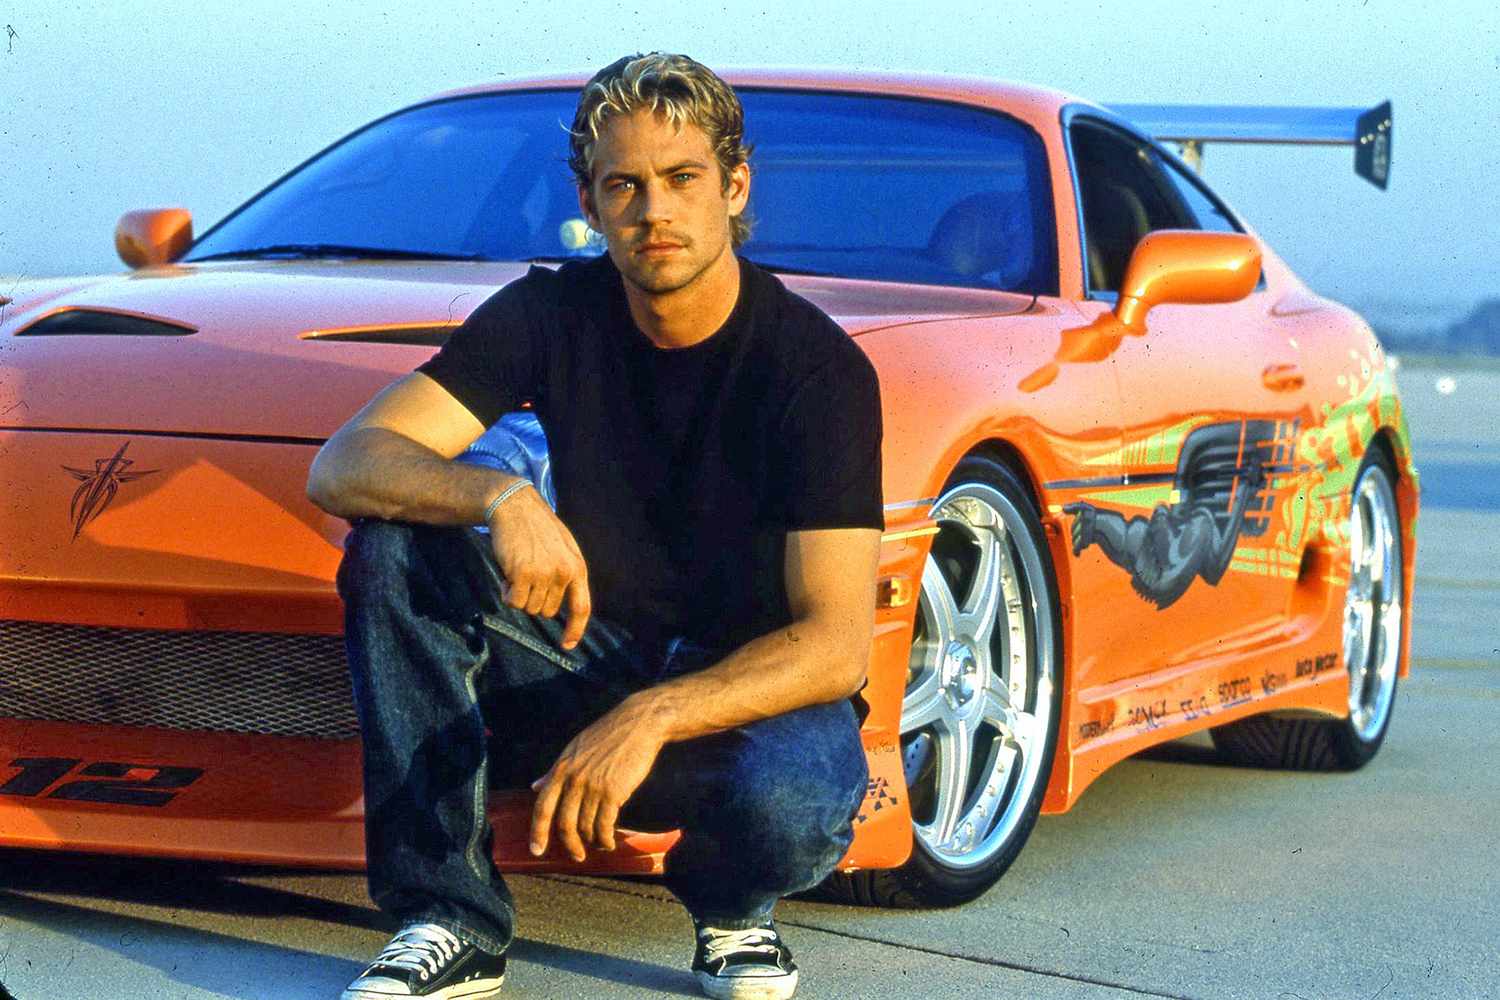 Paul Walker as Brian O'Conner in the Fast and Furious franchise